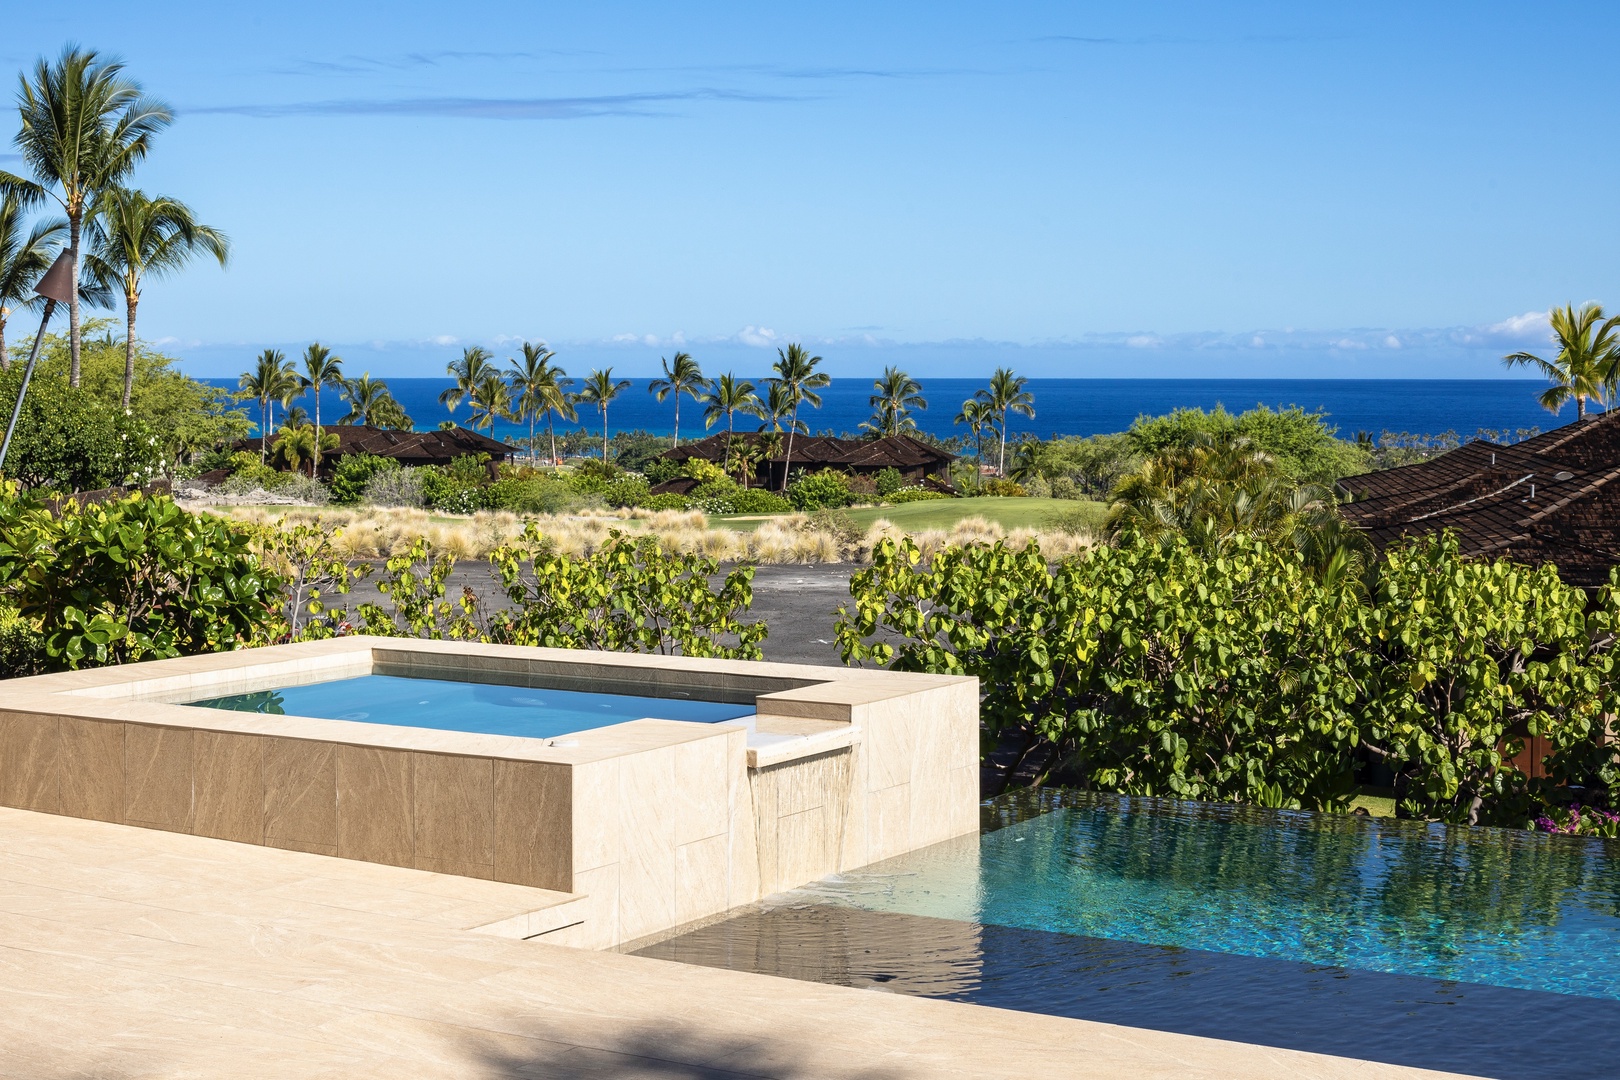 Kailua Kona Vacation Rentals, 4BD Kulanakauhale (3558) Estate Home at Four Seasons Resort at Hualalai - Contemporary design elements delight the senses, like this overflow waterfall from private spa to infinity pool.